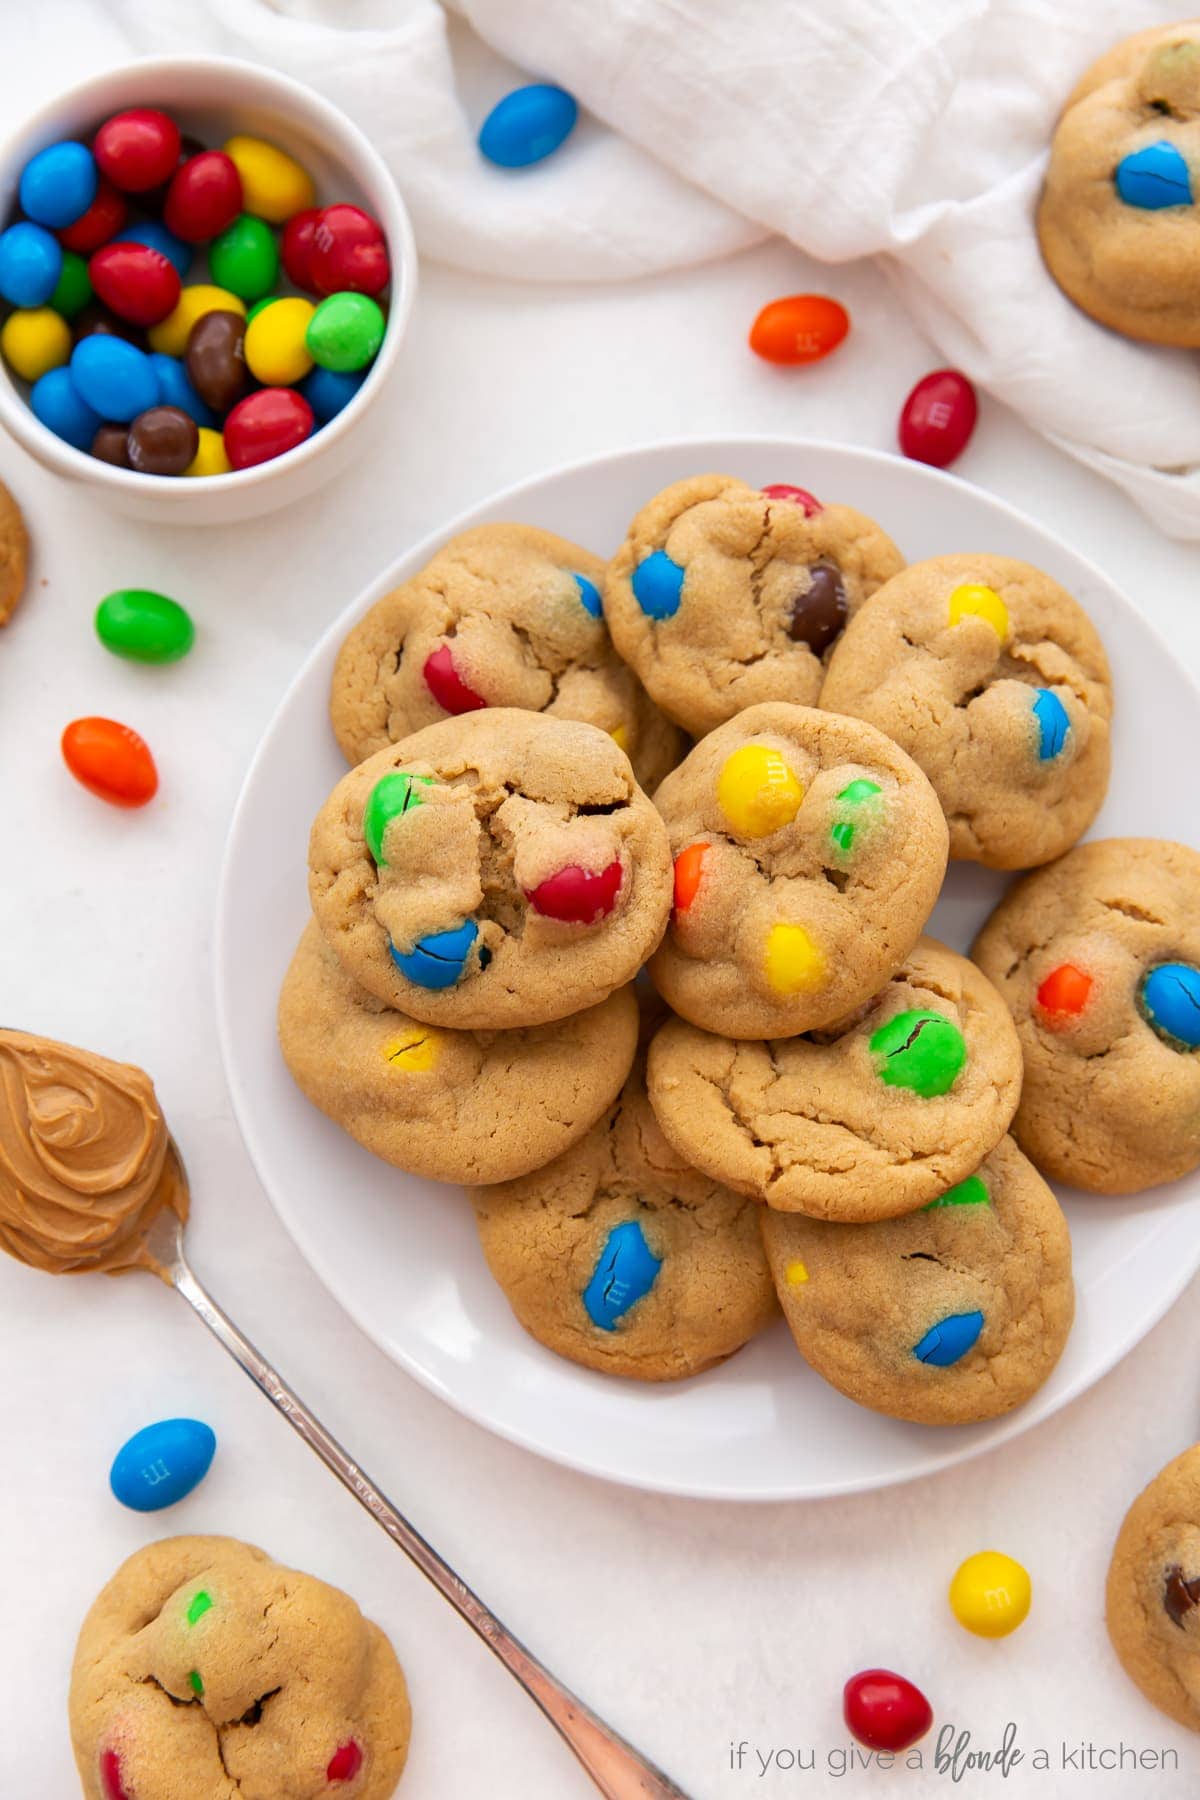 Peanut M&M's Peanut Butter Is The Spread You Should Put On Everything